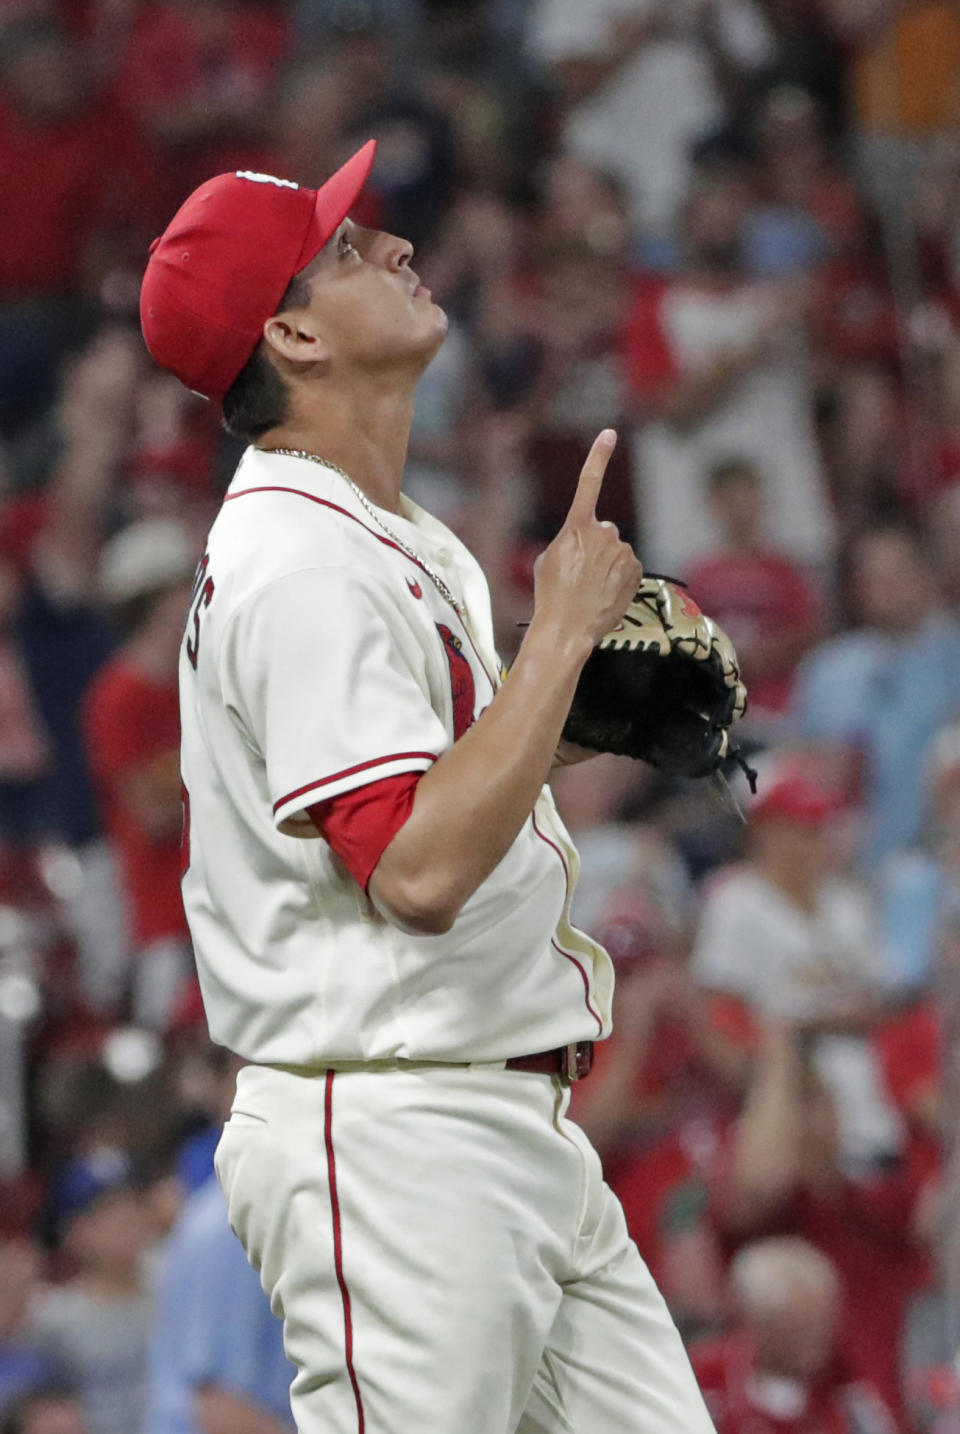 St. Louis Cardinals relief pitcher Giovanny Gallegos celebrates after the final out in the team's baseball game against the Kansas City Royals, Saturday, Aug. 7, 2021, in St. Louis. The Cardinals won 5-2. (AP Photo/Tom Gannam)